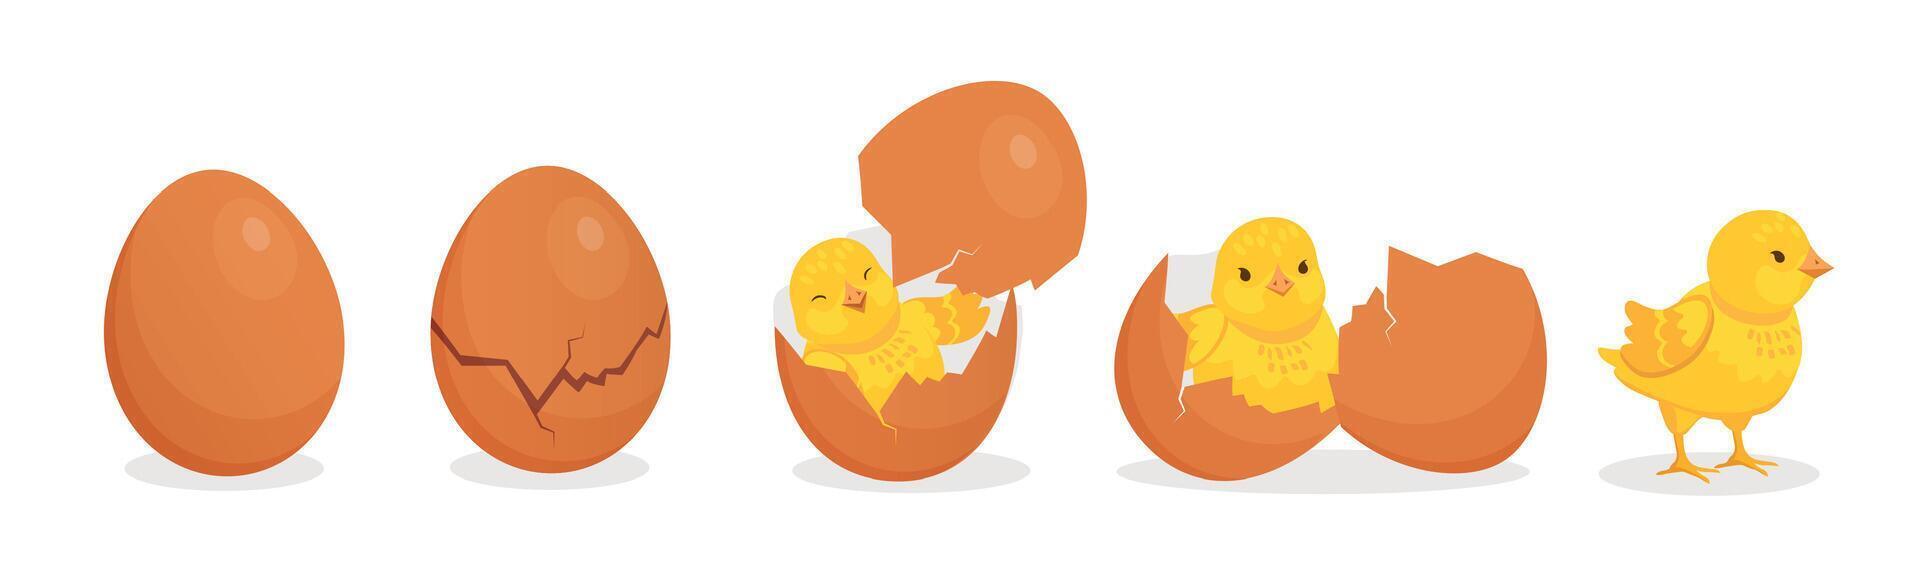 Cartoon cute baby chicken hatch from egg stages. Cracked eggshell and newborn yellow chick. Easter farm bird character birth vector concept